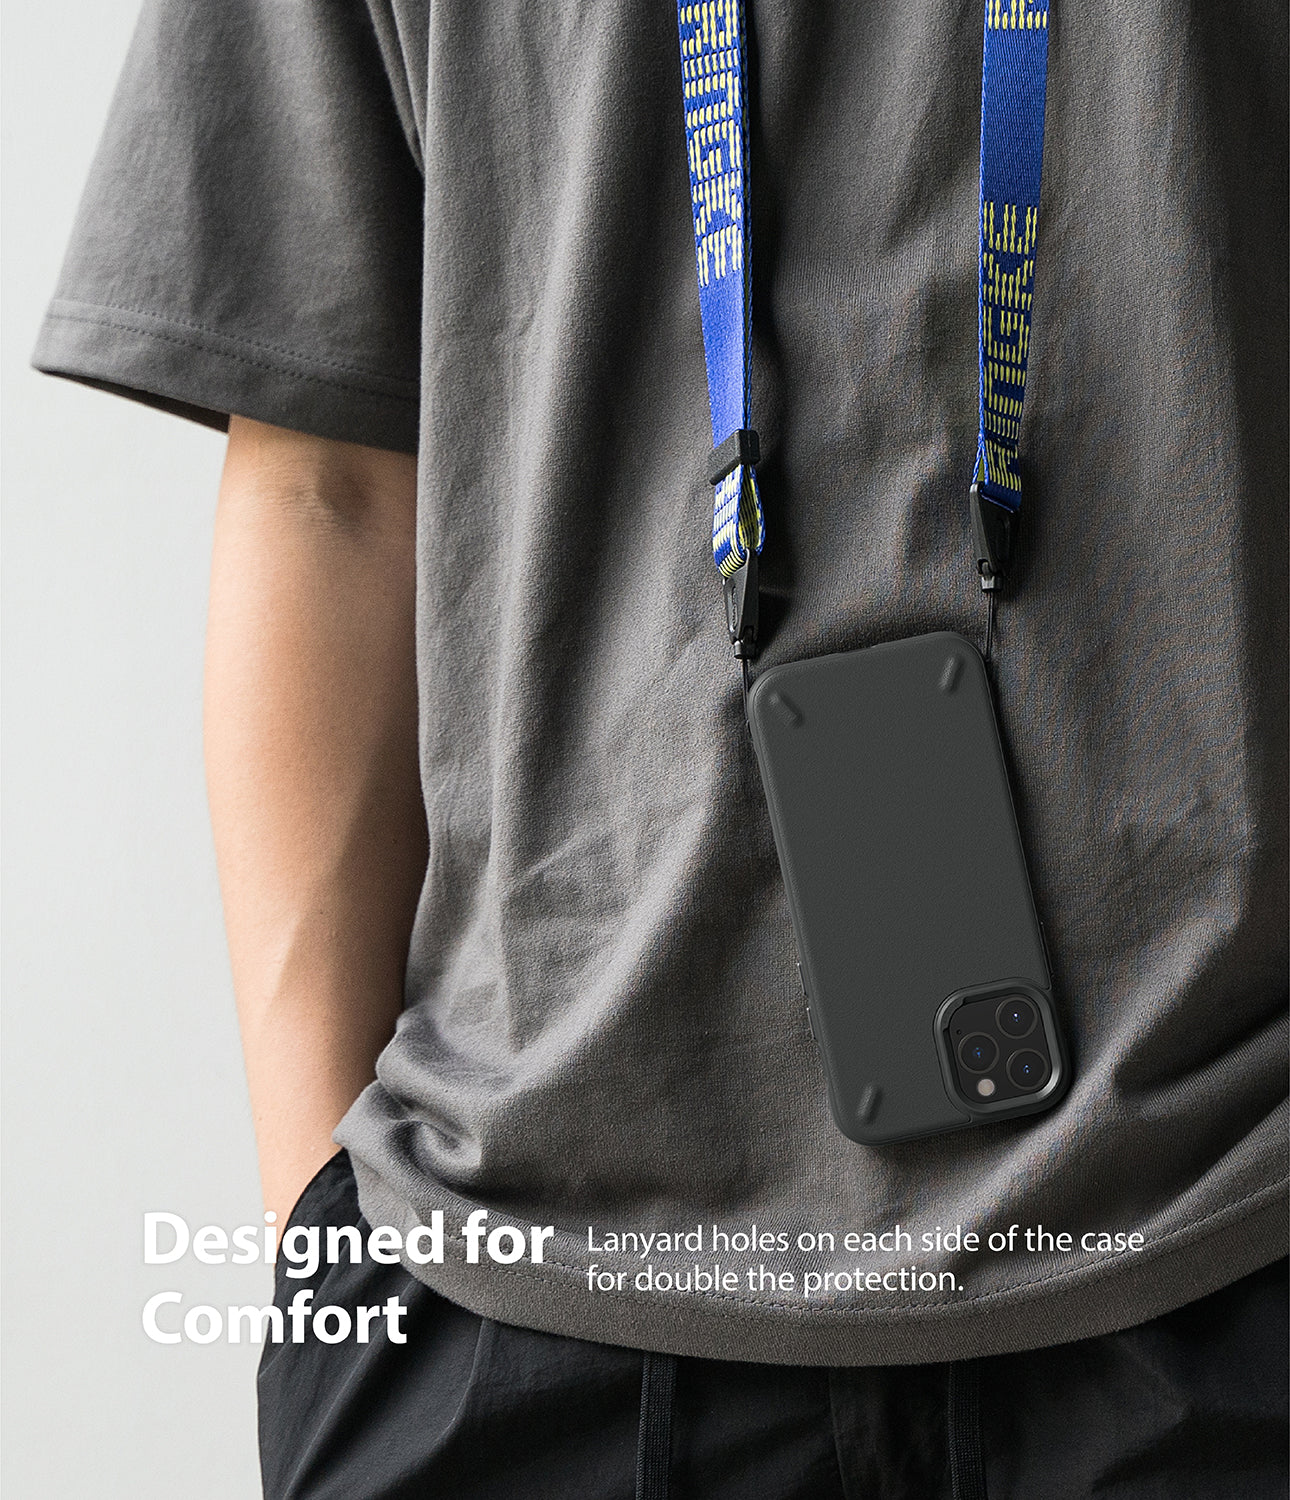 iPhone 12 Pro Max Case | Onyx - Designed for comfort